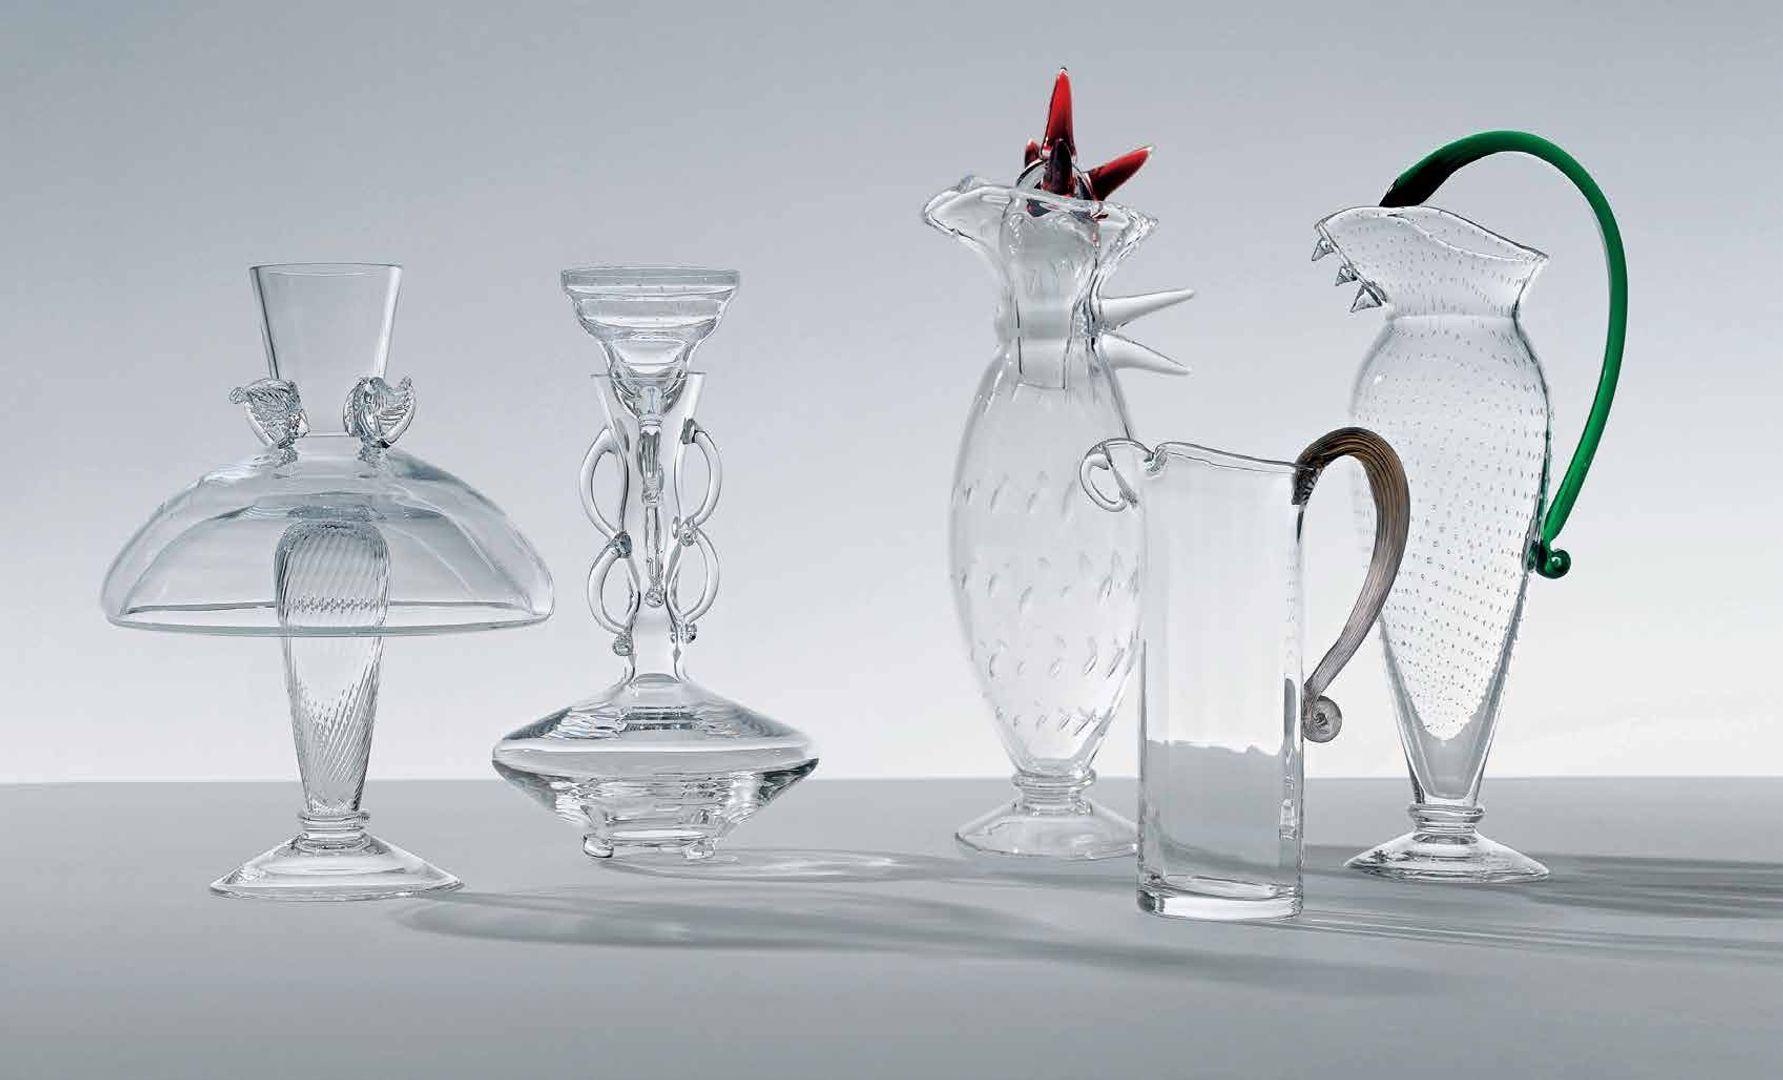 The imaginative, extravagant and fantastic Borek Sipek invites us to visit a world similar to the circus and italian opera buffa: The characters are all there, from the decanters with stopper similar to a clown cap to the jugs with skirt and arms